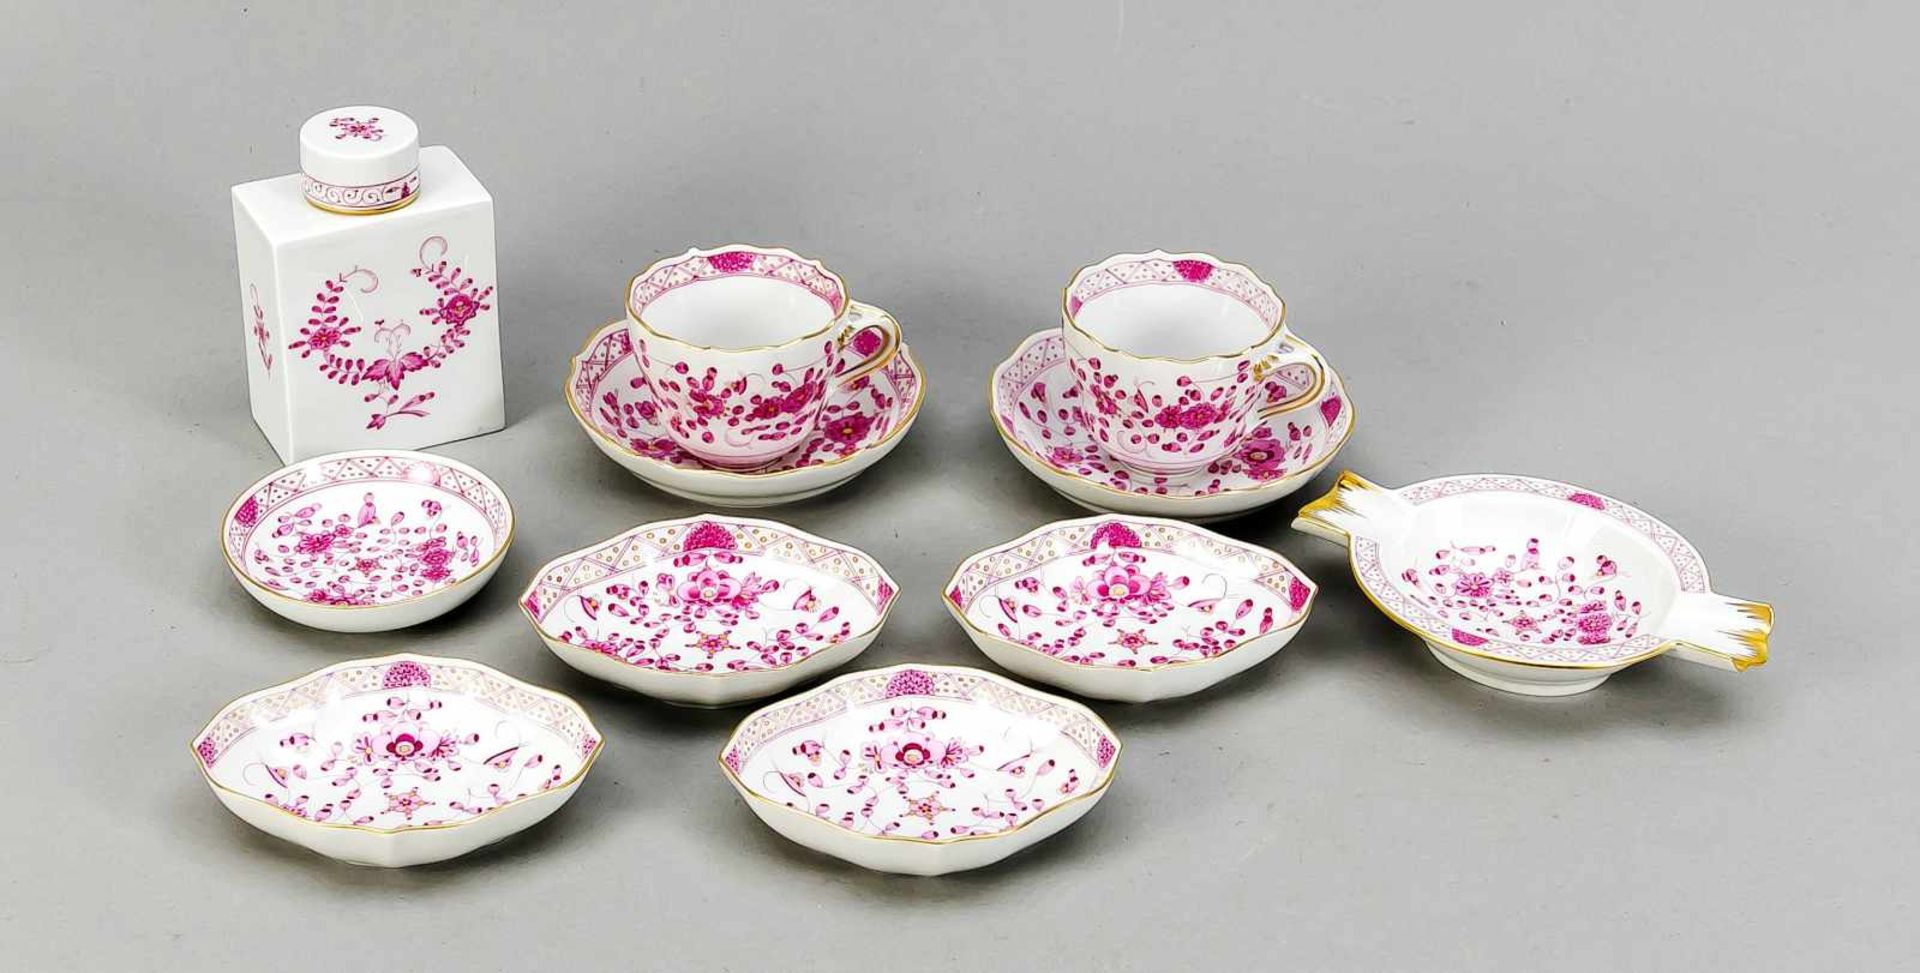 Collection 'Indian Purple', 11 pieces, Meissen, 20th century, mostly 1st quality, purple